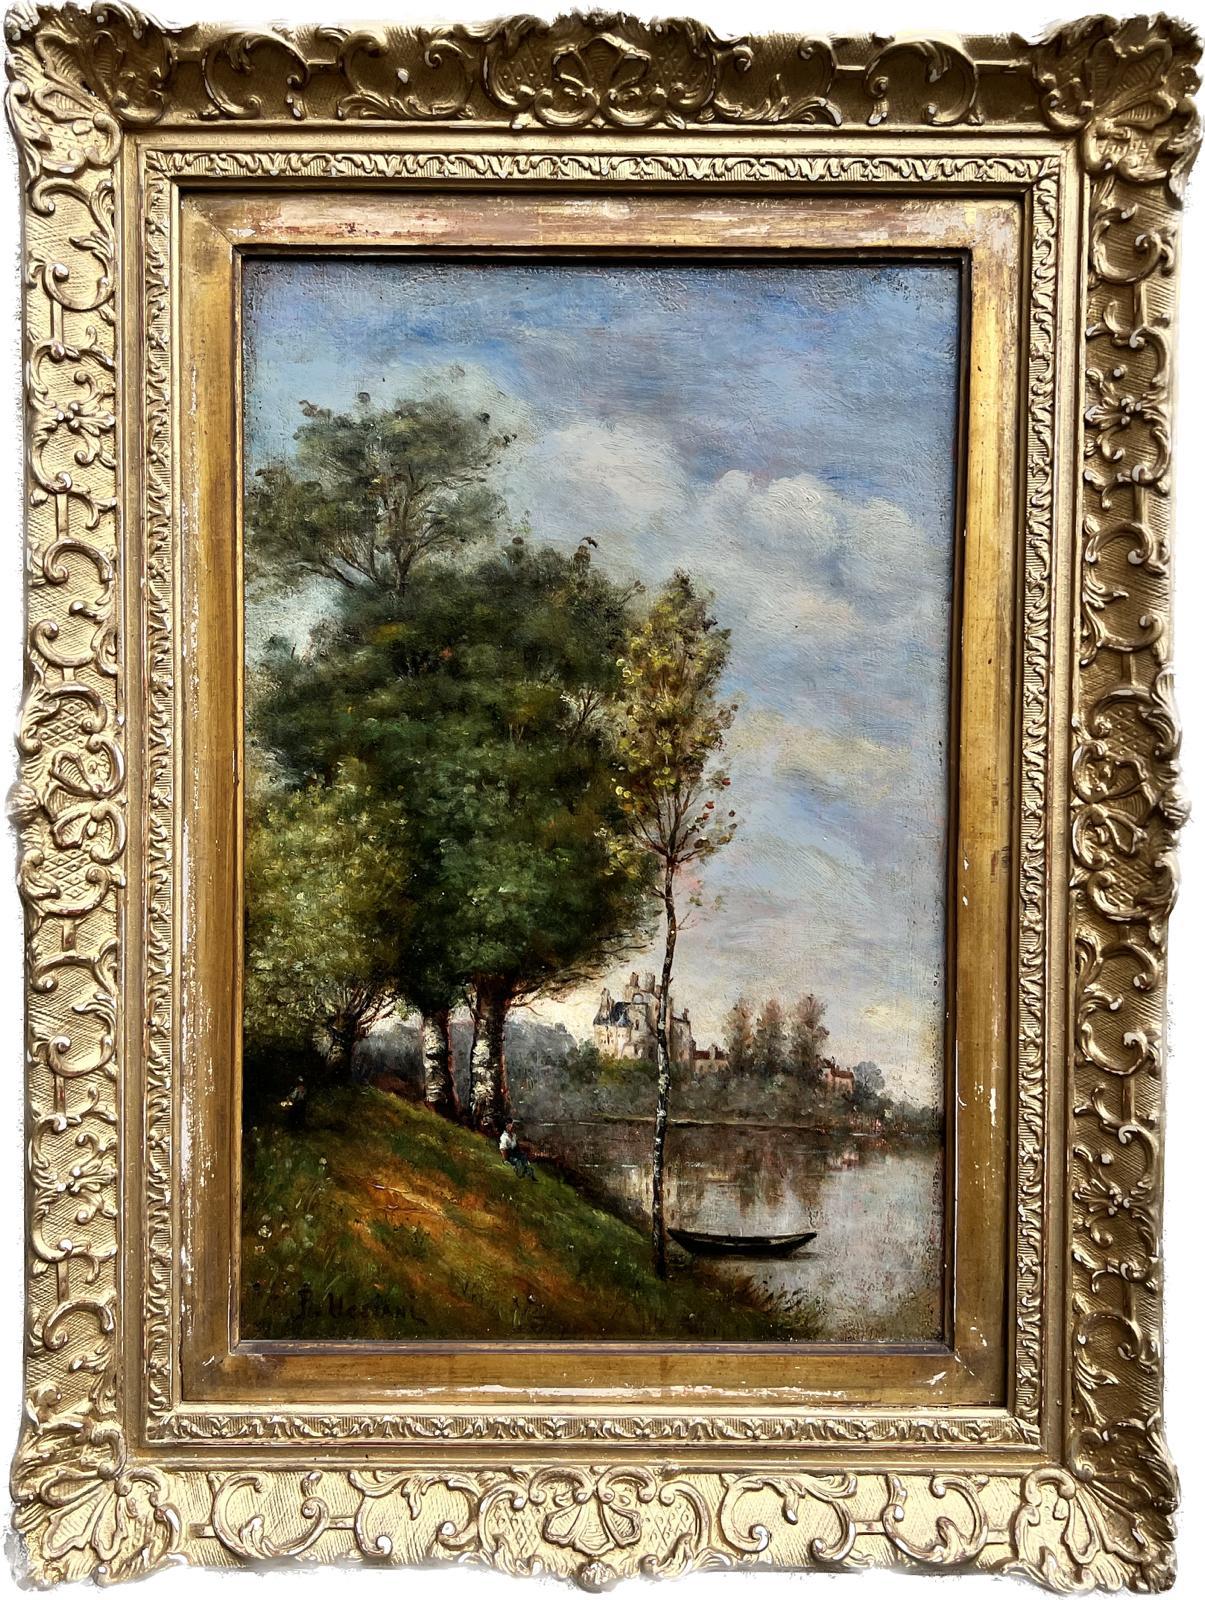 Barbizon School, late 19th/ early 20th century
indistinctly signed lower corner
inscribed verso
oil painting on board, framed
framed: 22 x 16.5 inches
board: 16.5 x 11 inches
provenance: private collection, France
condition: very good and sound